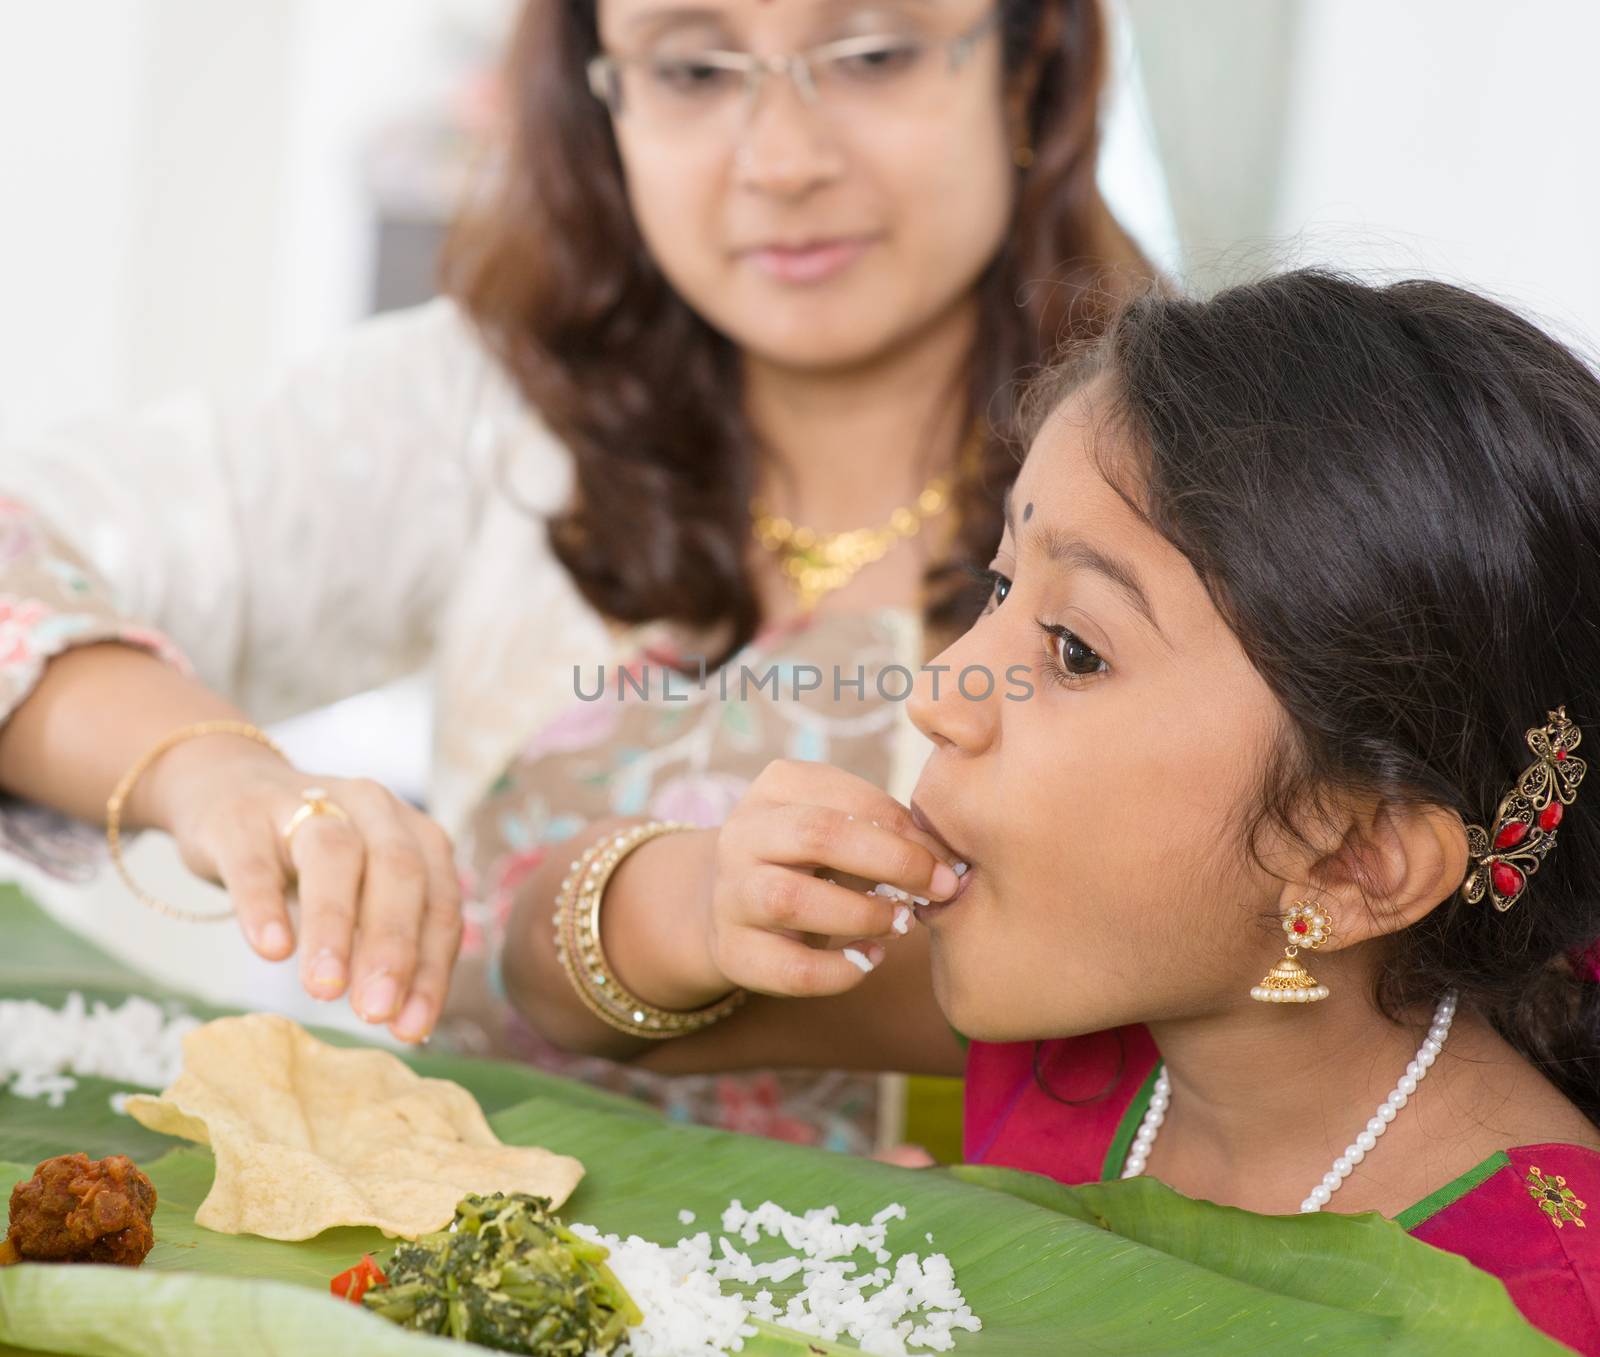 Indian family dining at home. Candid photo of Asian people eating rice with hands. India culture.